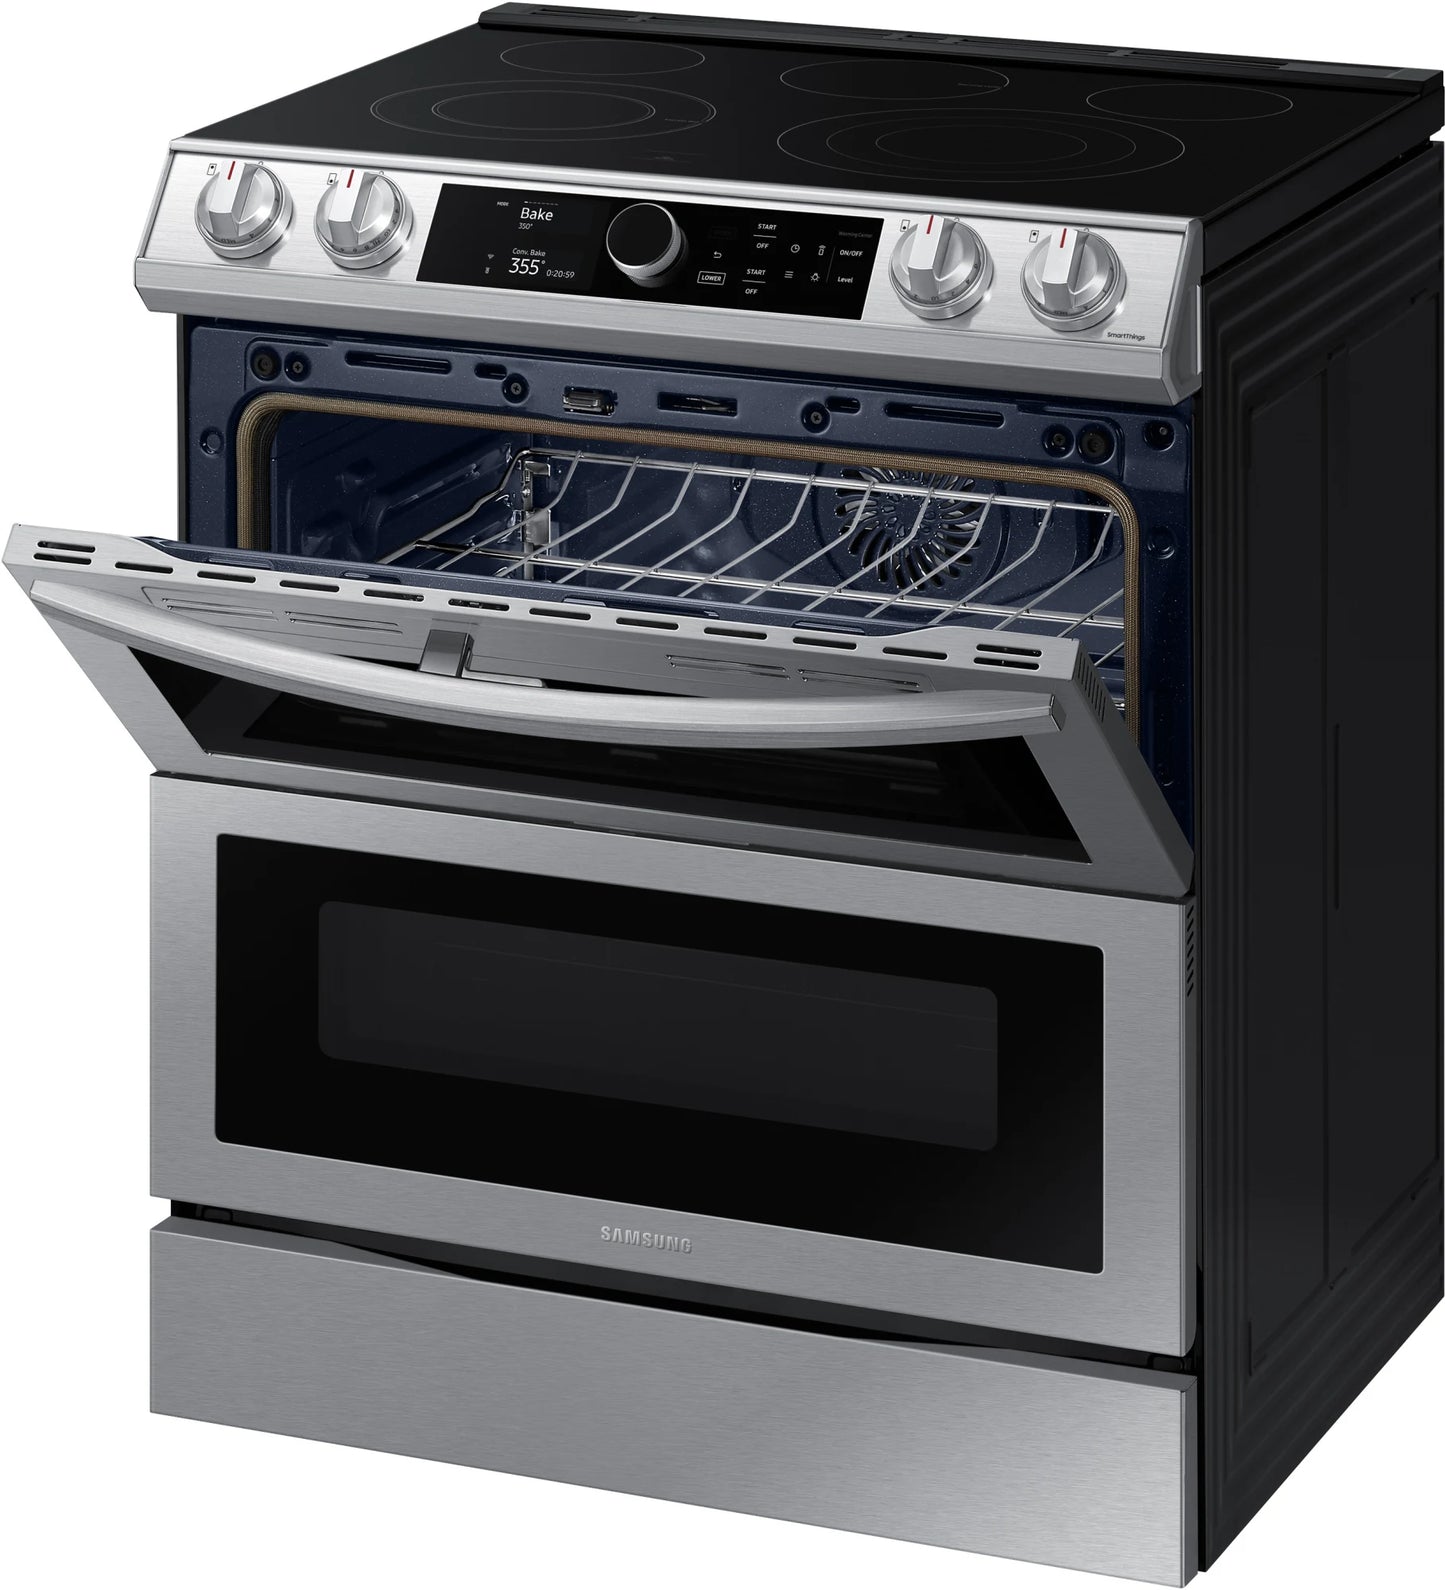 Samsung 30 Slide-In Electric Smart Range NE63T8751SS,5-Element Cooktop,Dual Oven,6.3 Cu. Ft.,Storage Drawer, Air Fry, Convection,Self + Steam Clean,Smart Dial,Flex Double,Wi-Fi,Voice-Enabled,Express Boil,CSA,Star-K,ADA,Stainless Steel,Steam,New,999131